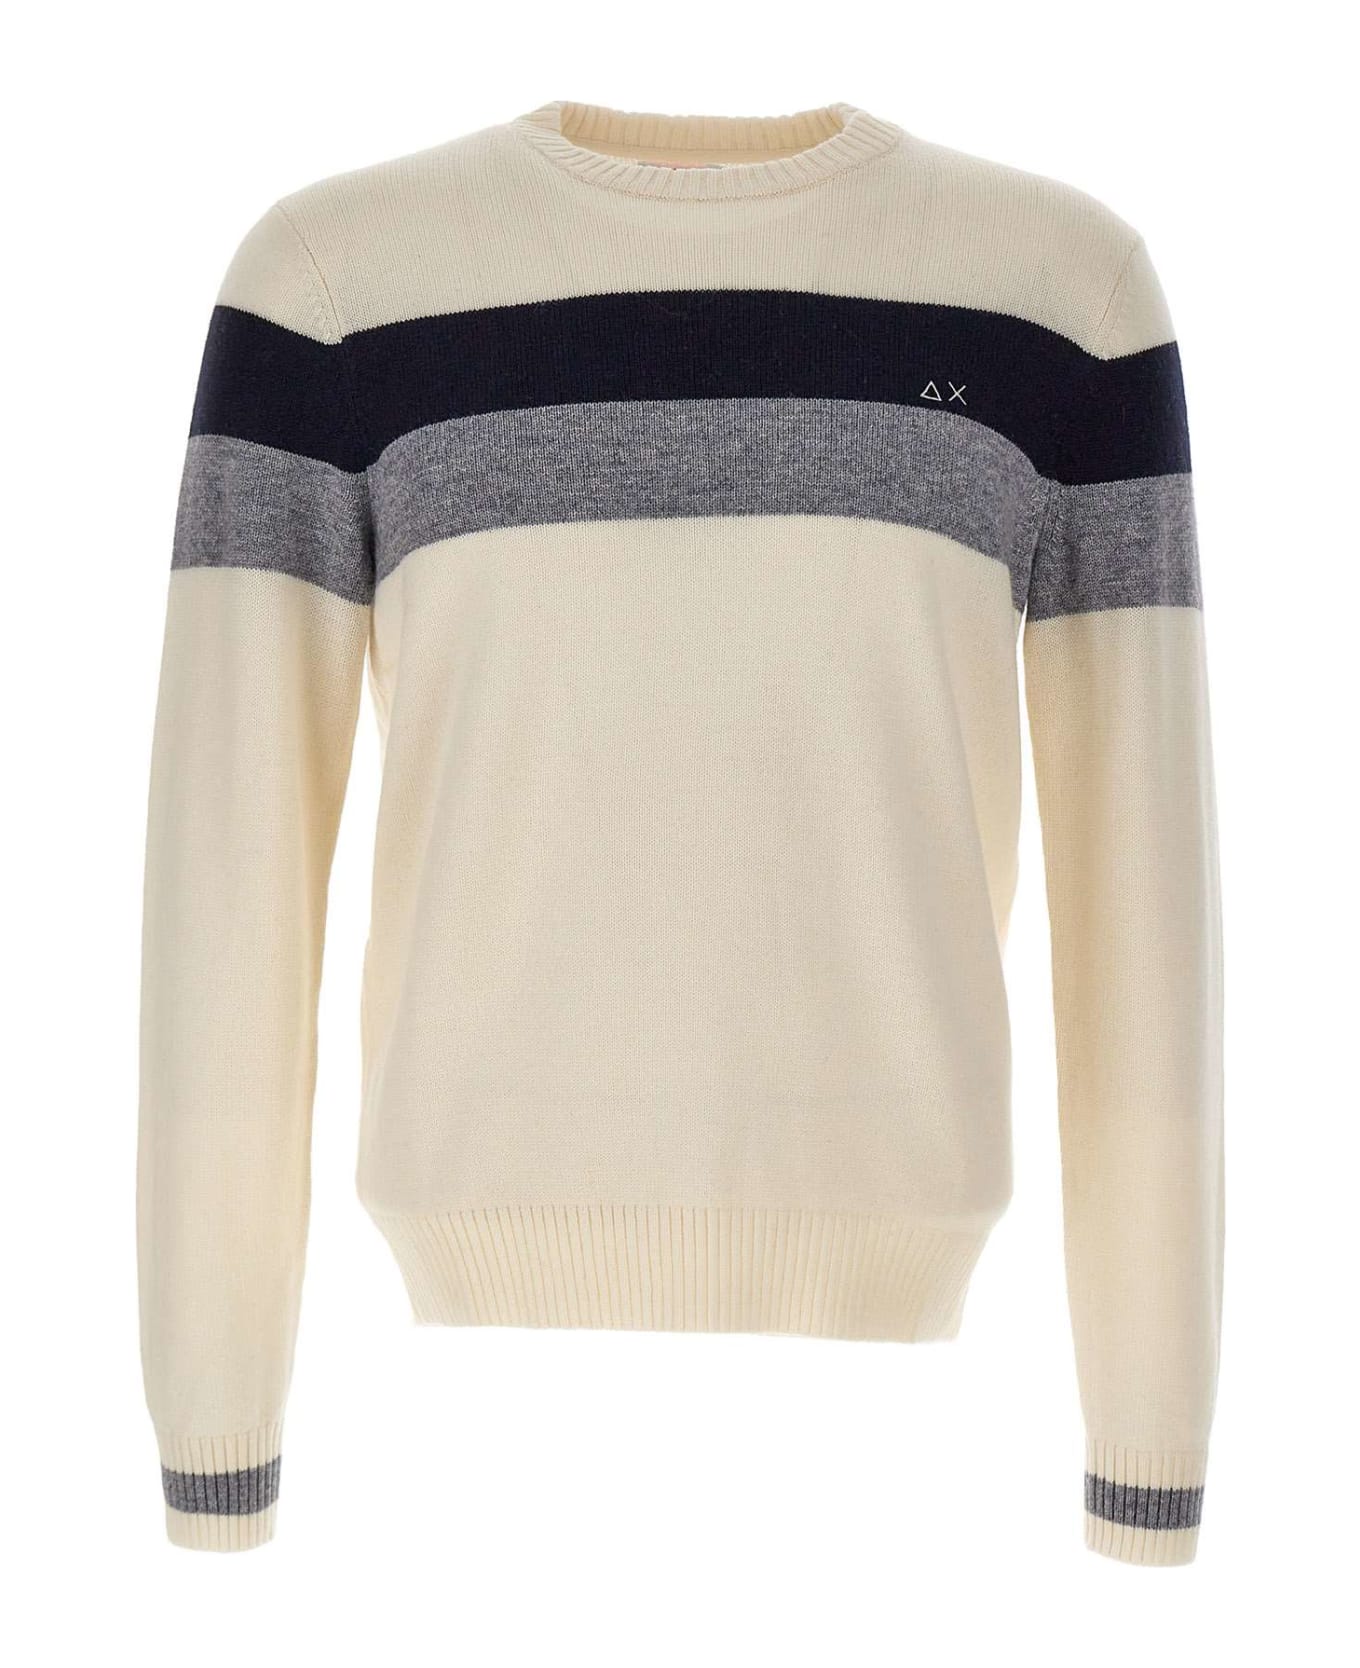 Sun 68 'fancy' Wool, Viscose And Cashmere Sweater Sweater - BIANCO ニットウェア